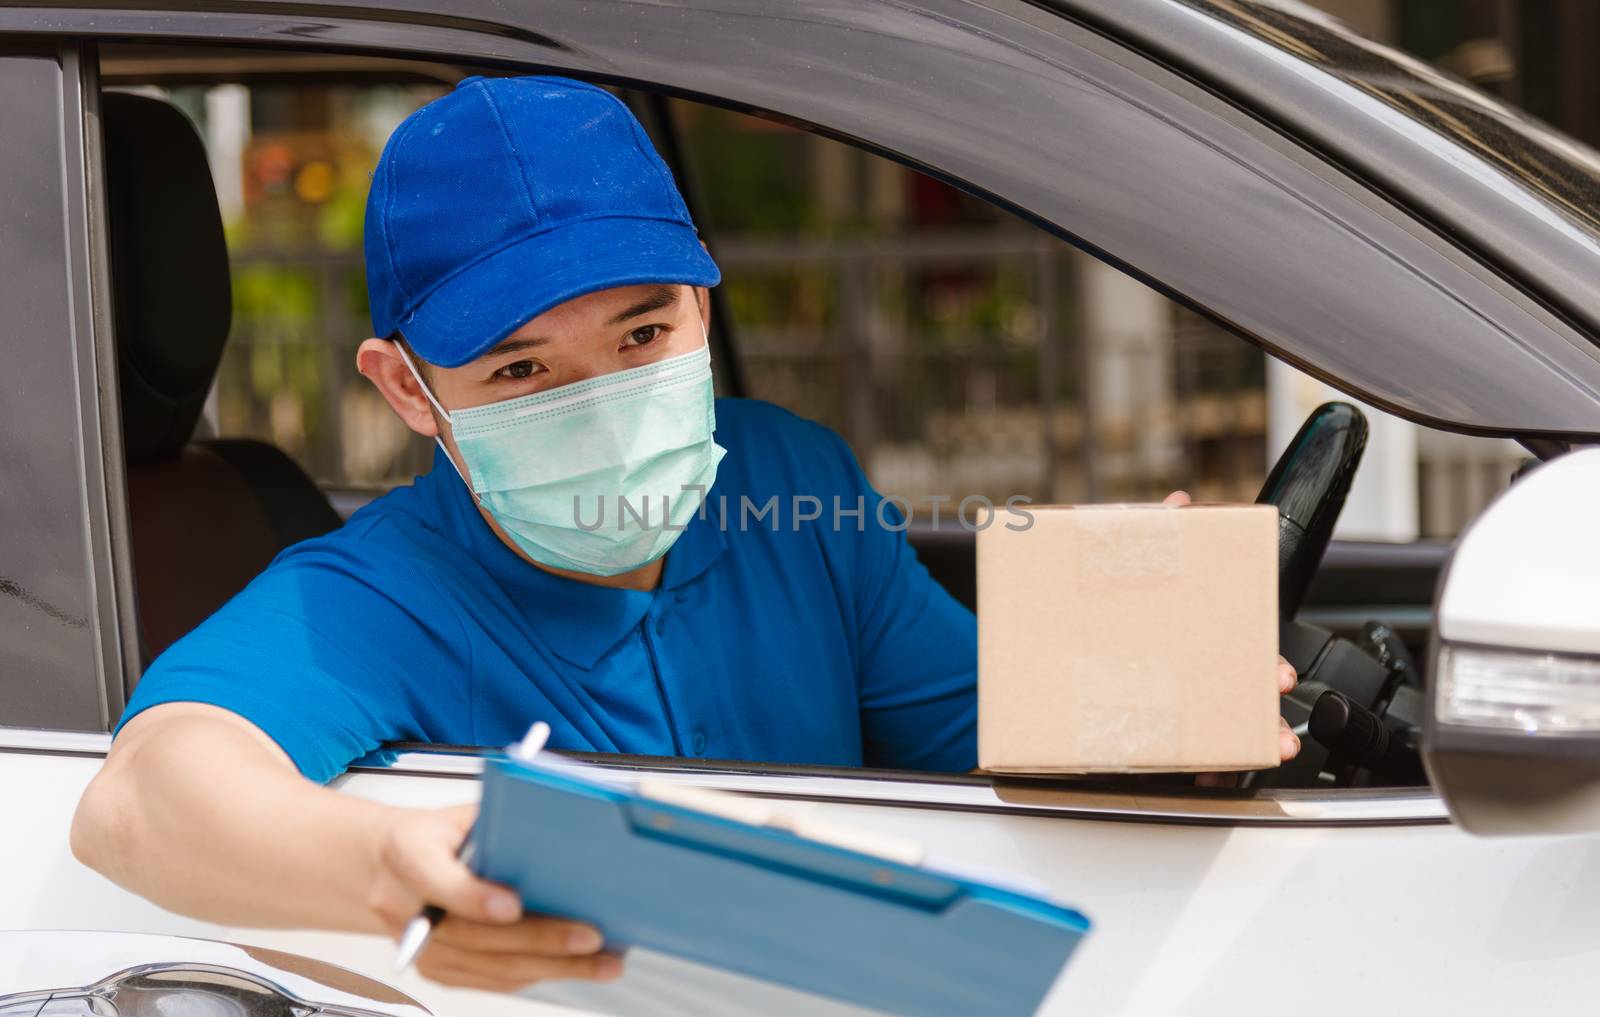 Asian delivery courier young man driver inside van car giving parcel post boxes to customer receiving both protective face mask, under curfew quarantine pandemic coronavirus COVID-19